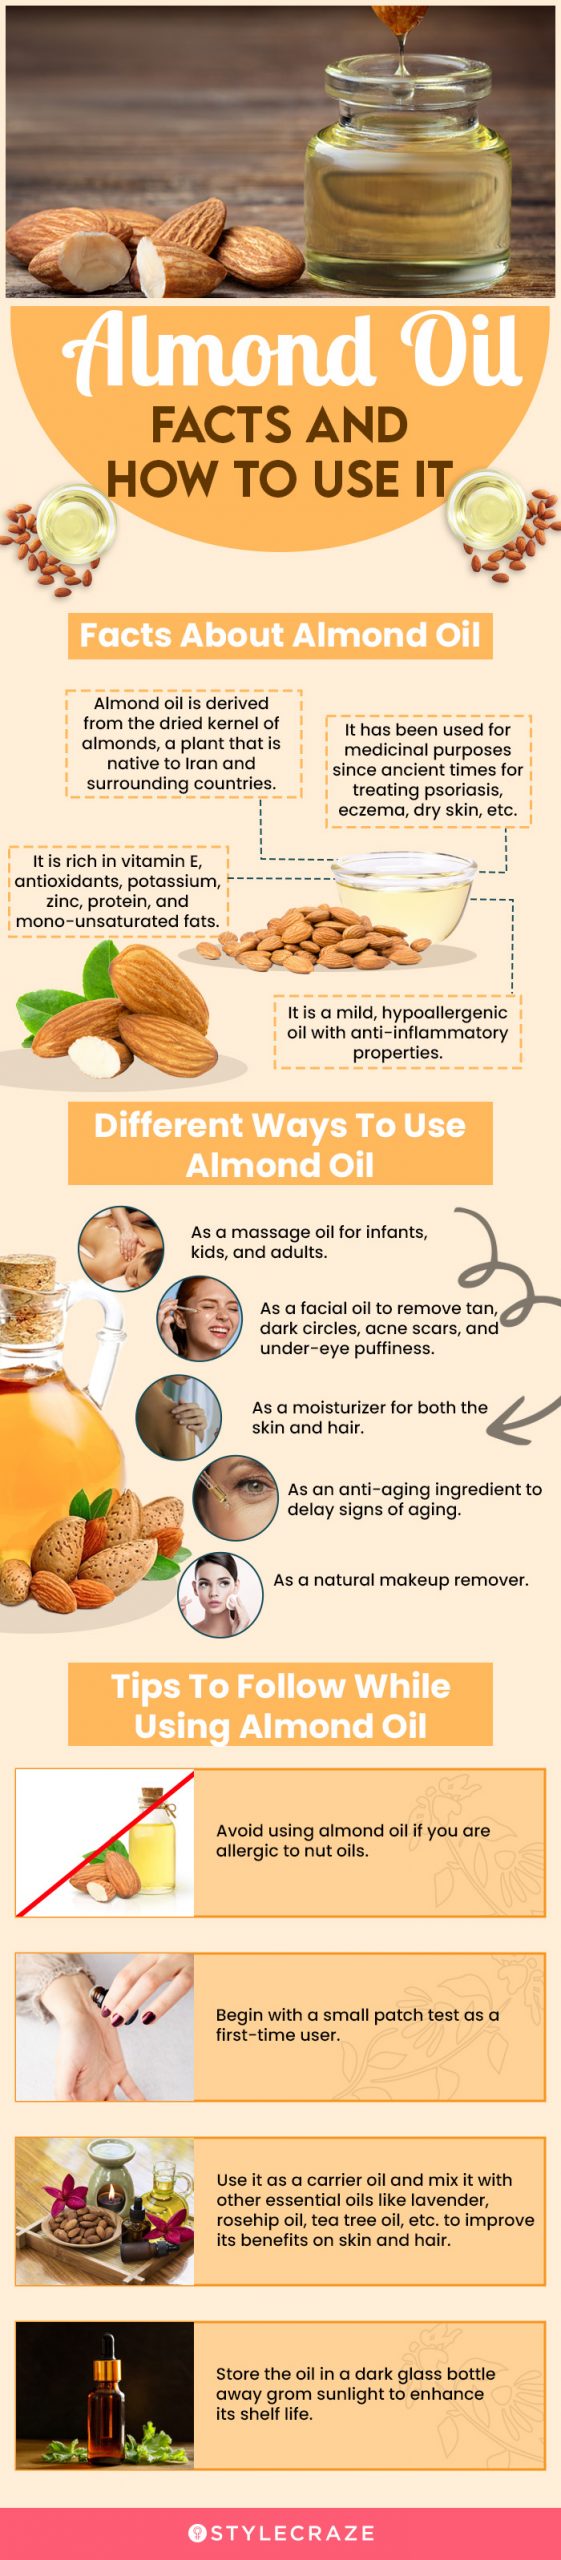 Almond Oil: Facts And How To Use It [infographic]